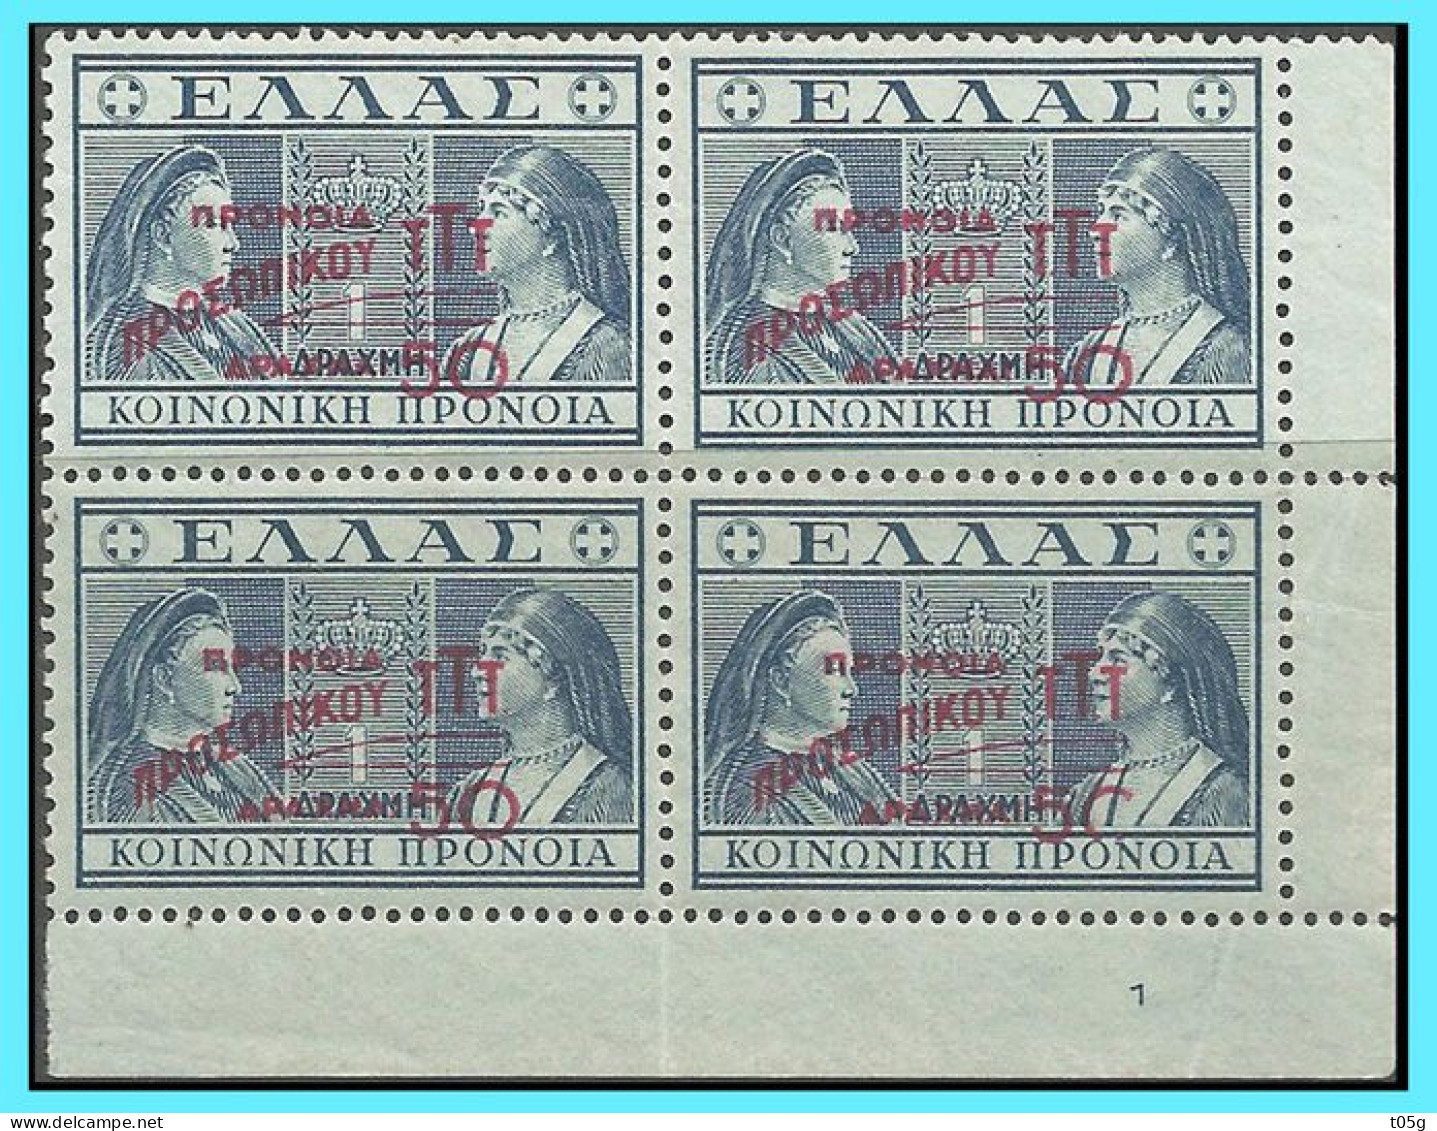 GREECE-GRECE - HELLAS 1946-50:  10drx / 50L Charity Stamps (with delcaque overprint) Block/4  Set MNH** - Charity Issues